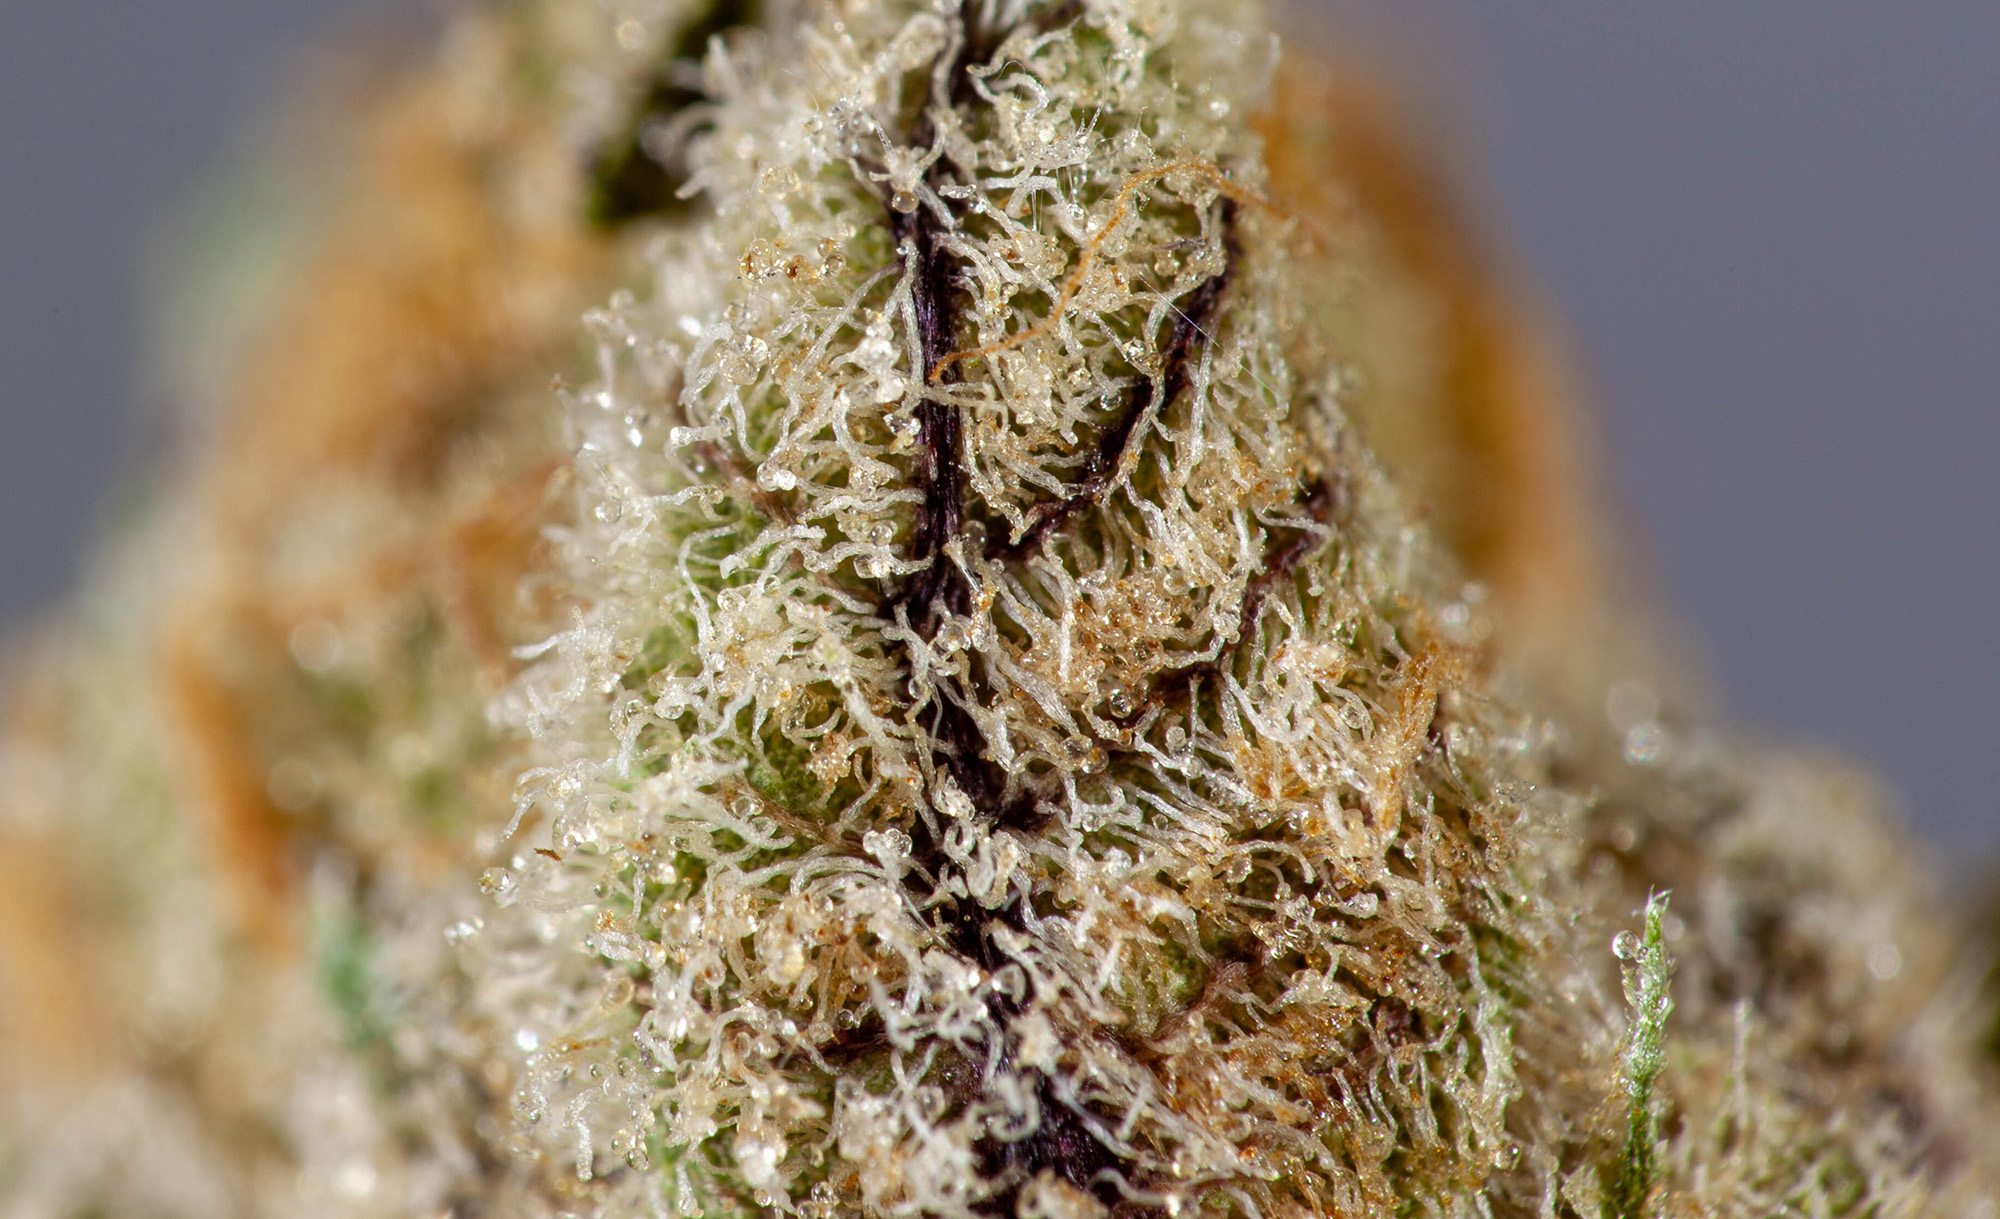 The purple, green, a shimmer of trichomes make Blue Lime Pie from Skord a treat for the senses.